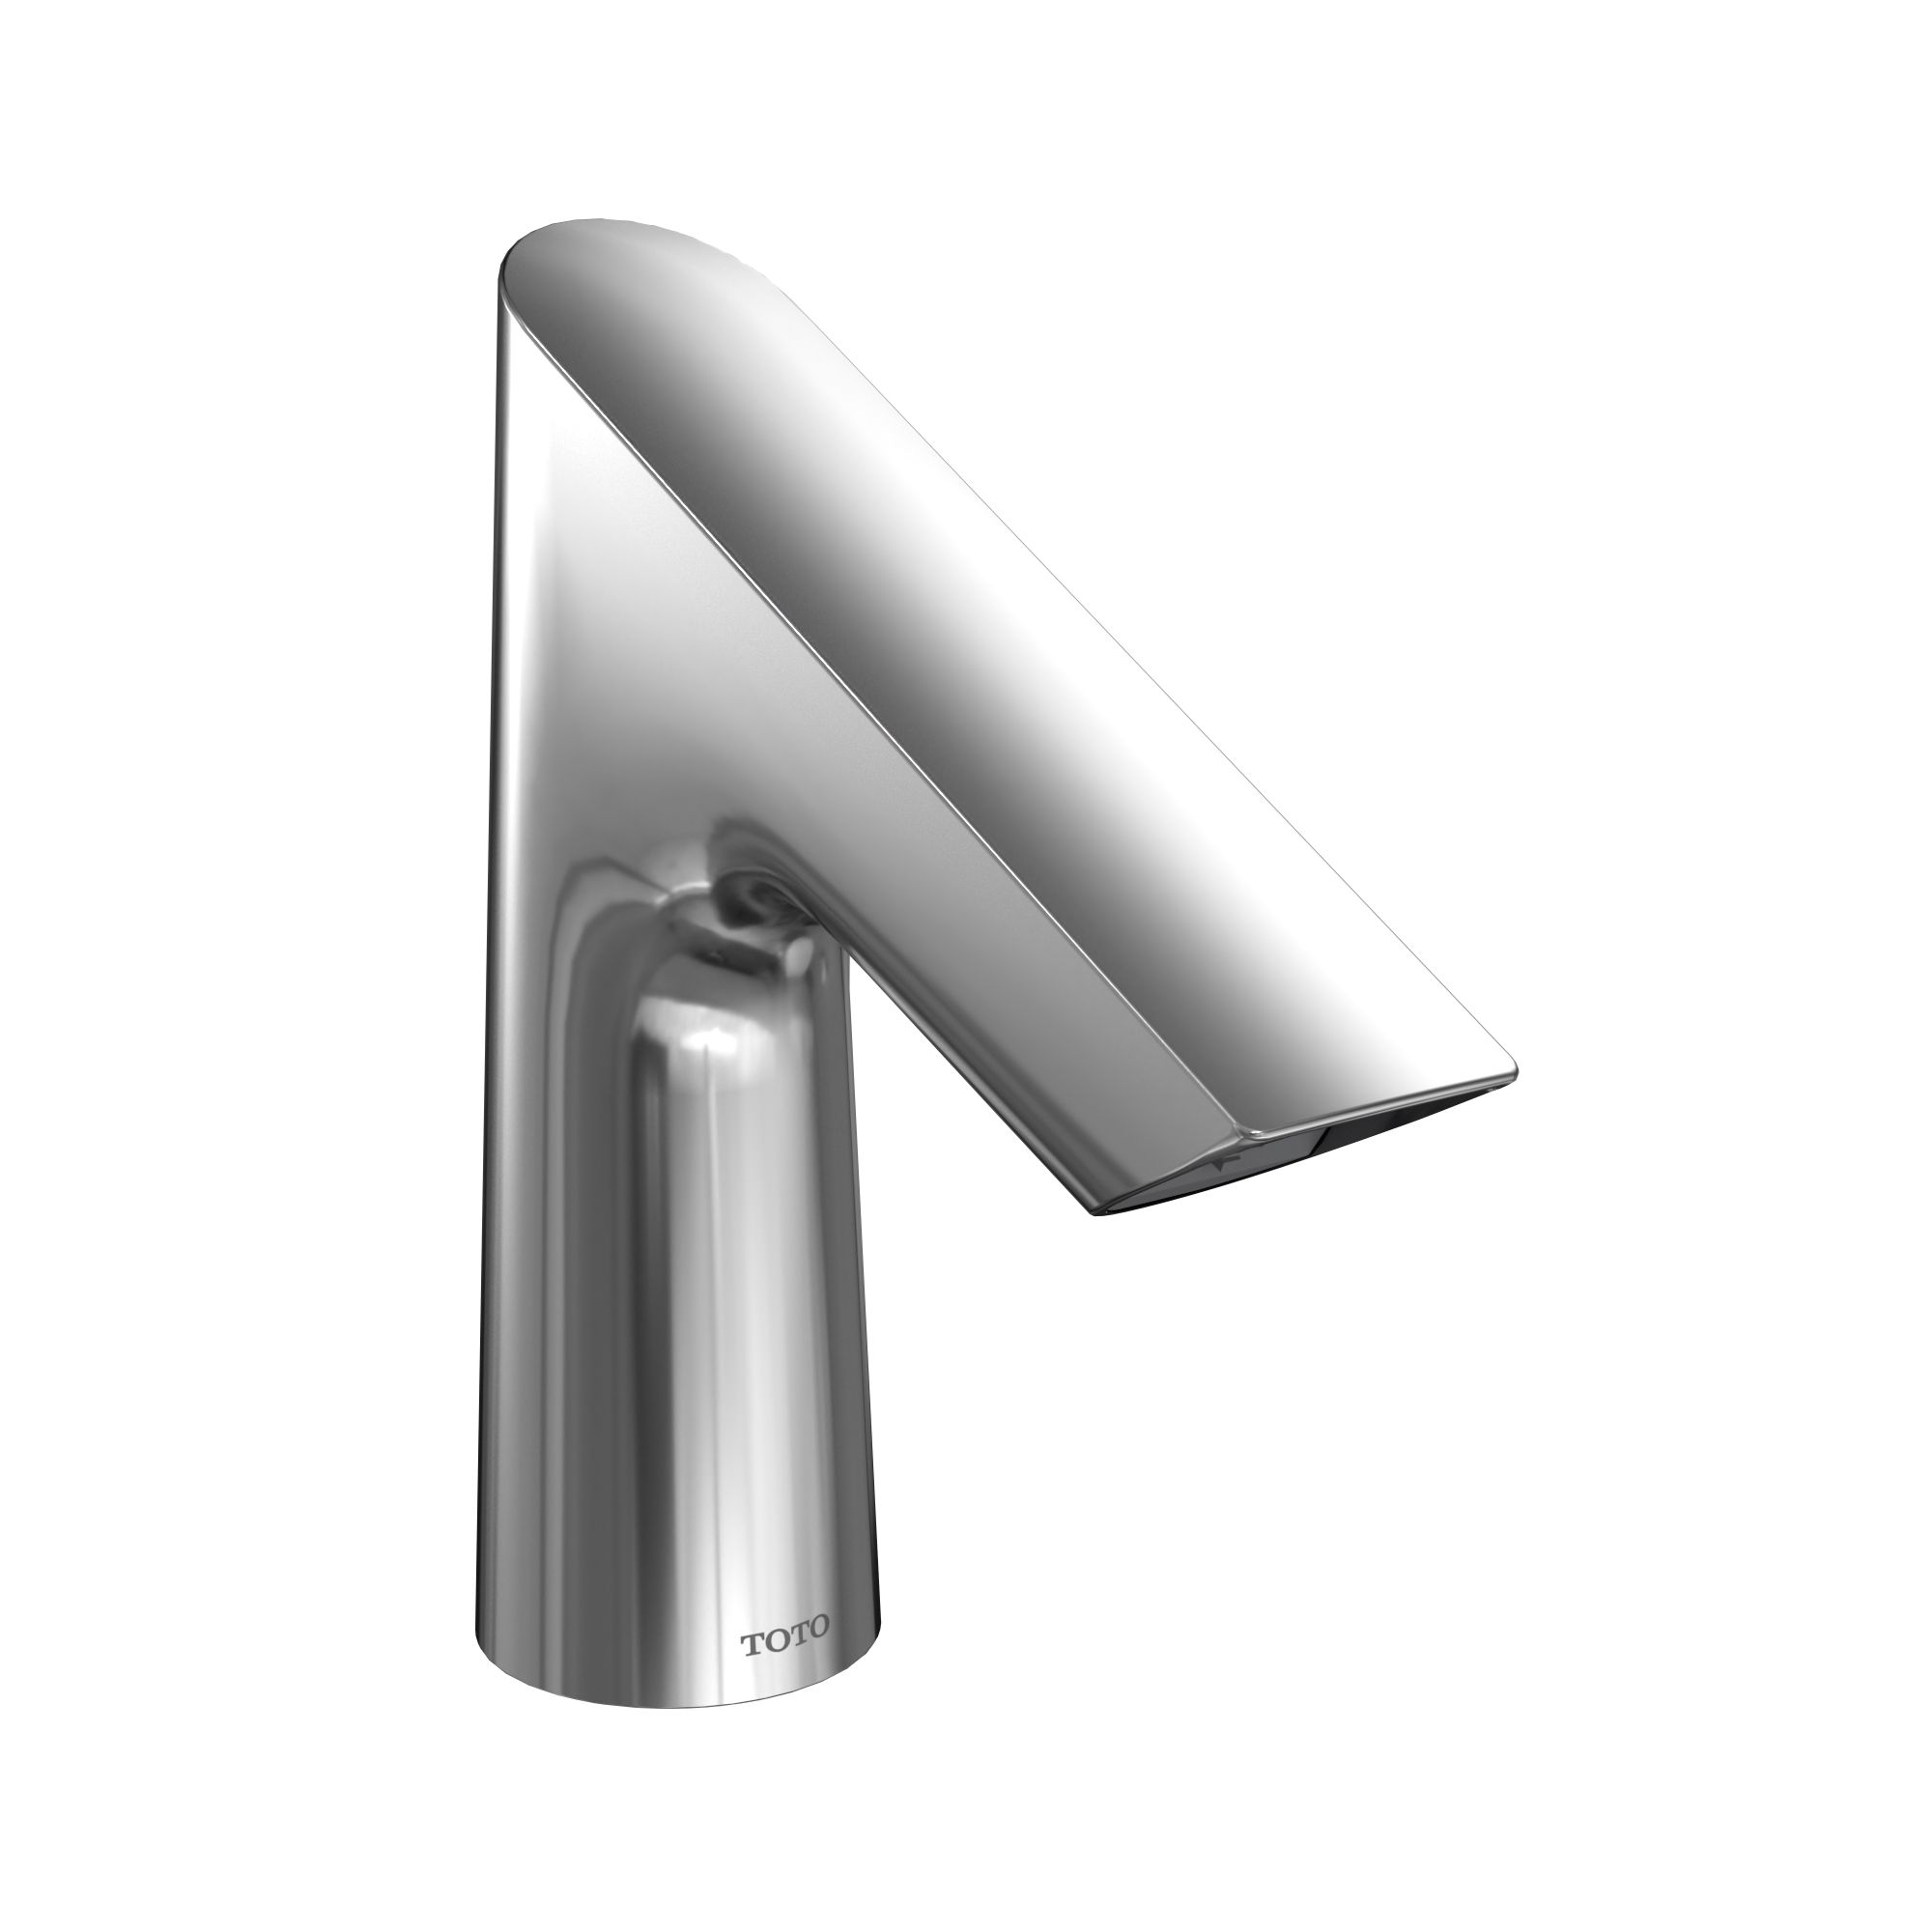 Standard-S Touchless Faucet - 0.5 GPM